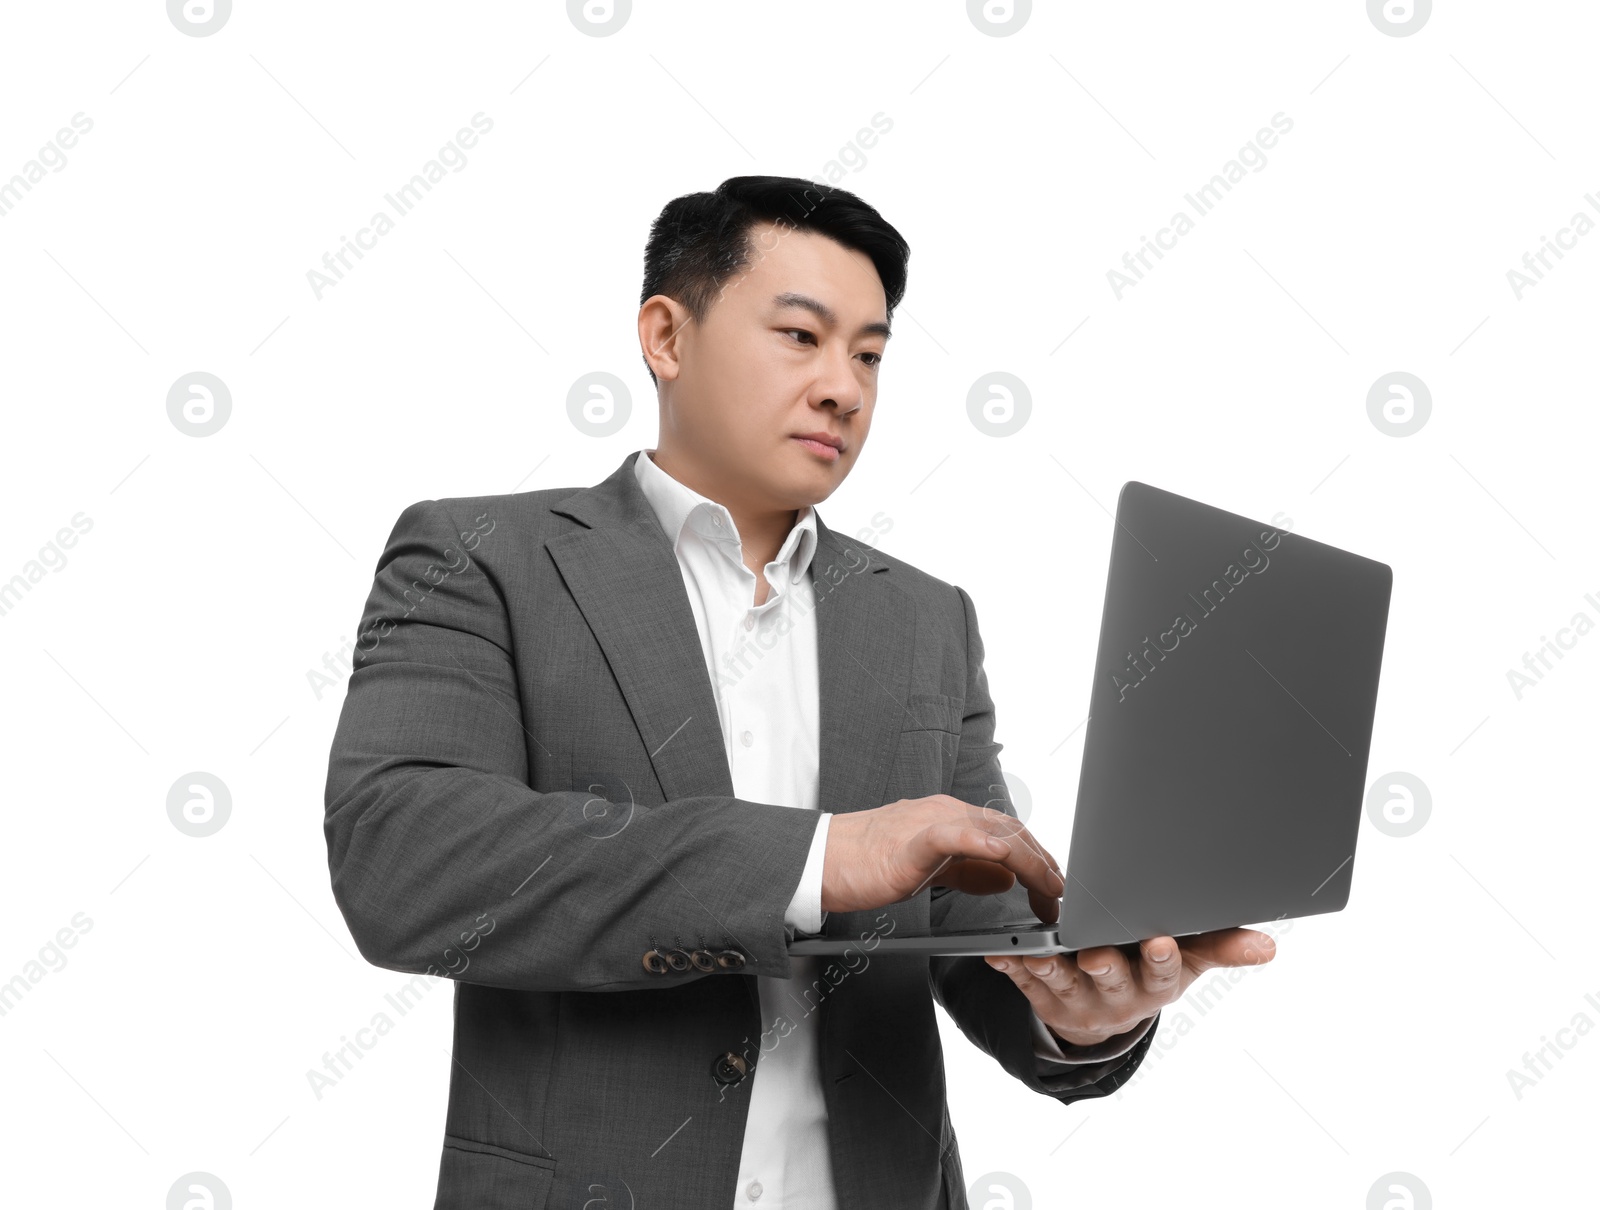 Photo of Businessman in suit working on laptop against white background